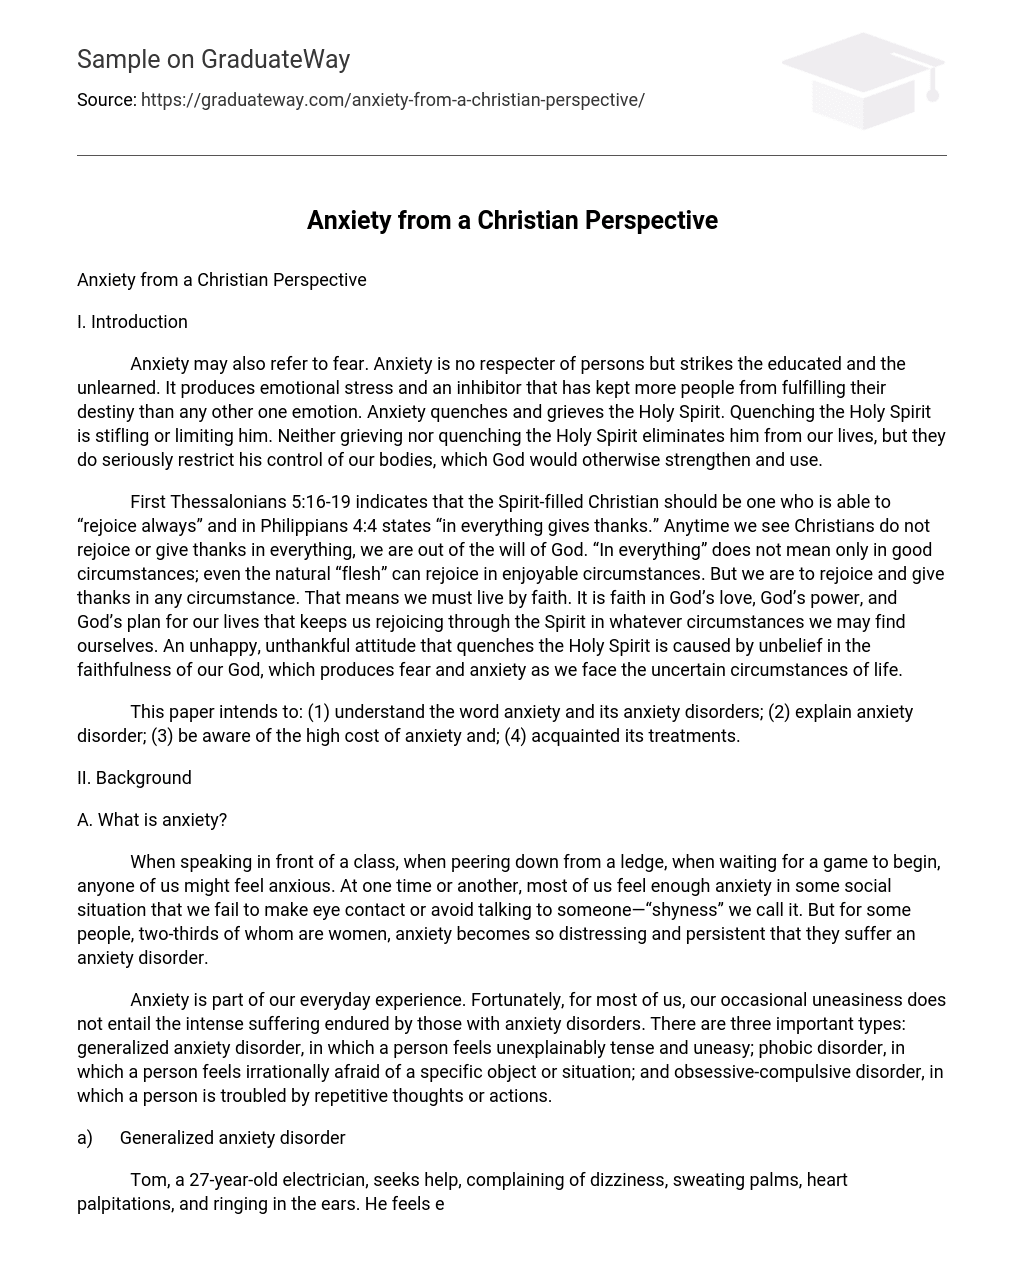 Anxiety from a Christian Perspective